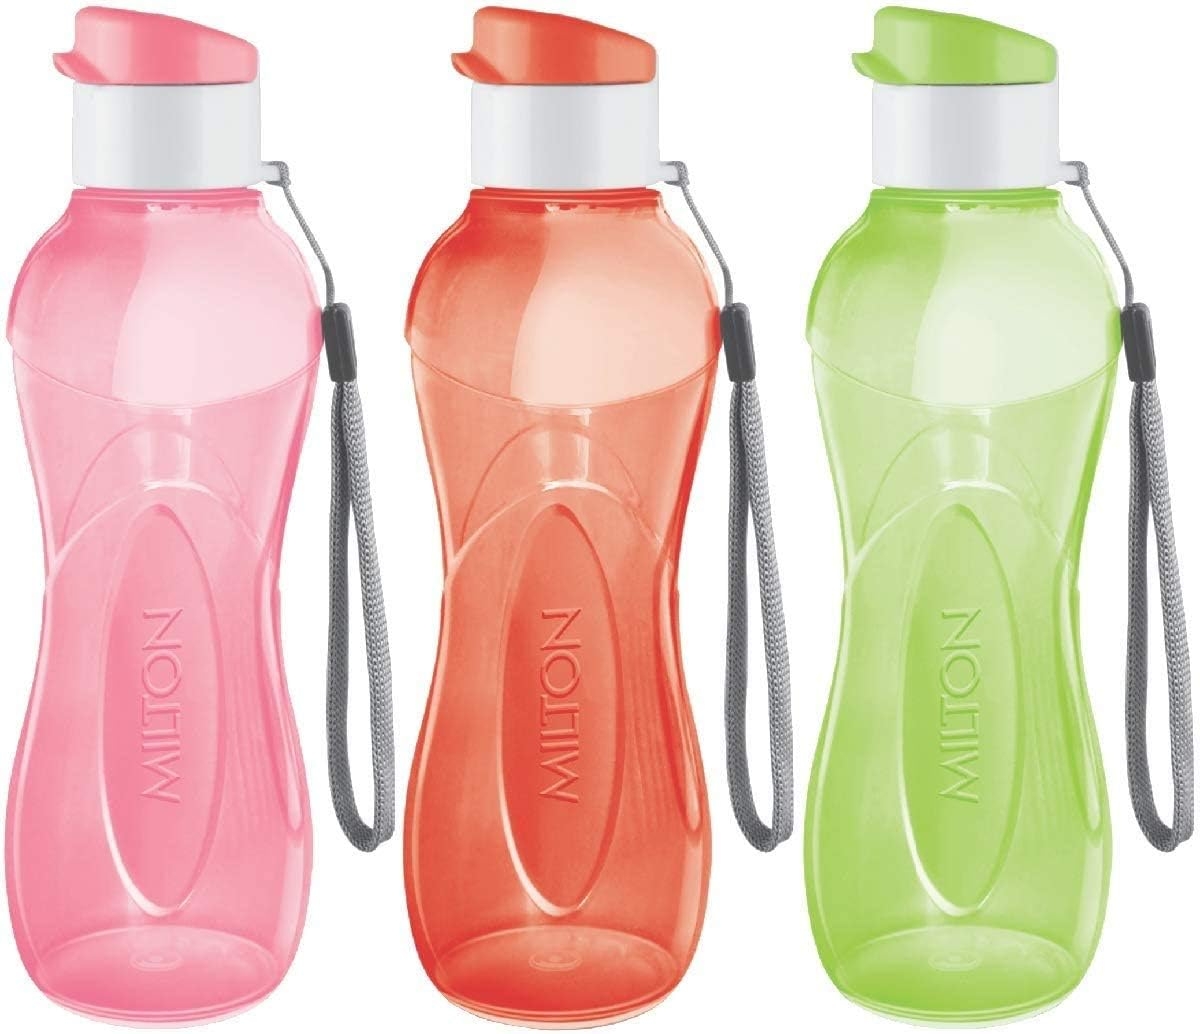 MILTON Water Bottle Kids Reusable Leakproof 12 Oz Plastic Wide Mouth Large Big Drink Bottle BPA & Leak Free with Handle Strap Carrier for Cycling Camping Hiking Gym Yoga